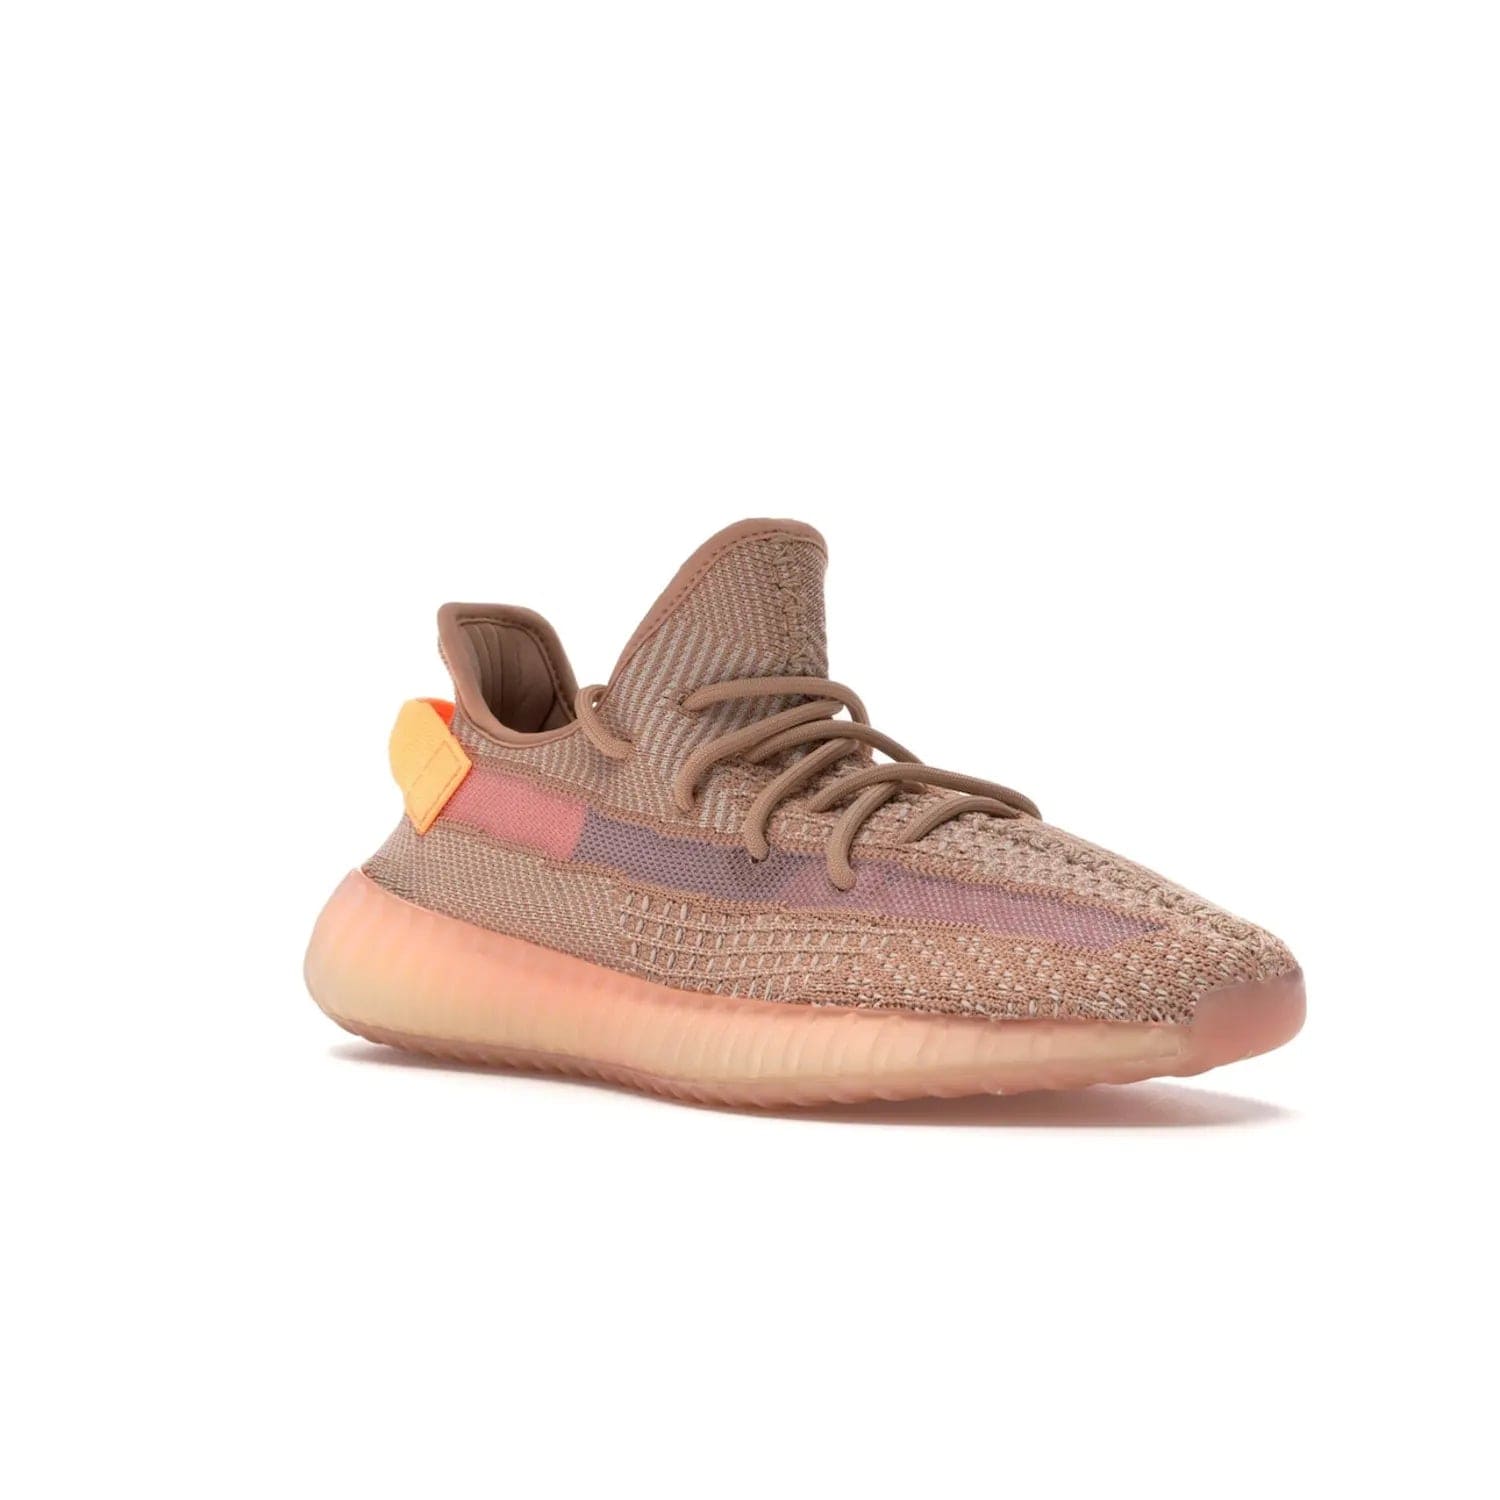 adidas Yeezy Boost 350 V2 Clay - Image 5 - Only at www.BallersClubKickz.com - The adidas Yeezy Boost 350 V2 Clay - style and swag in one shoe. Orange accents, clay midsole and sole. Get yours today!